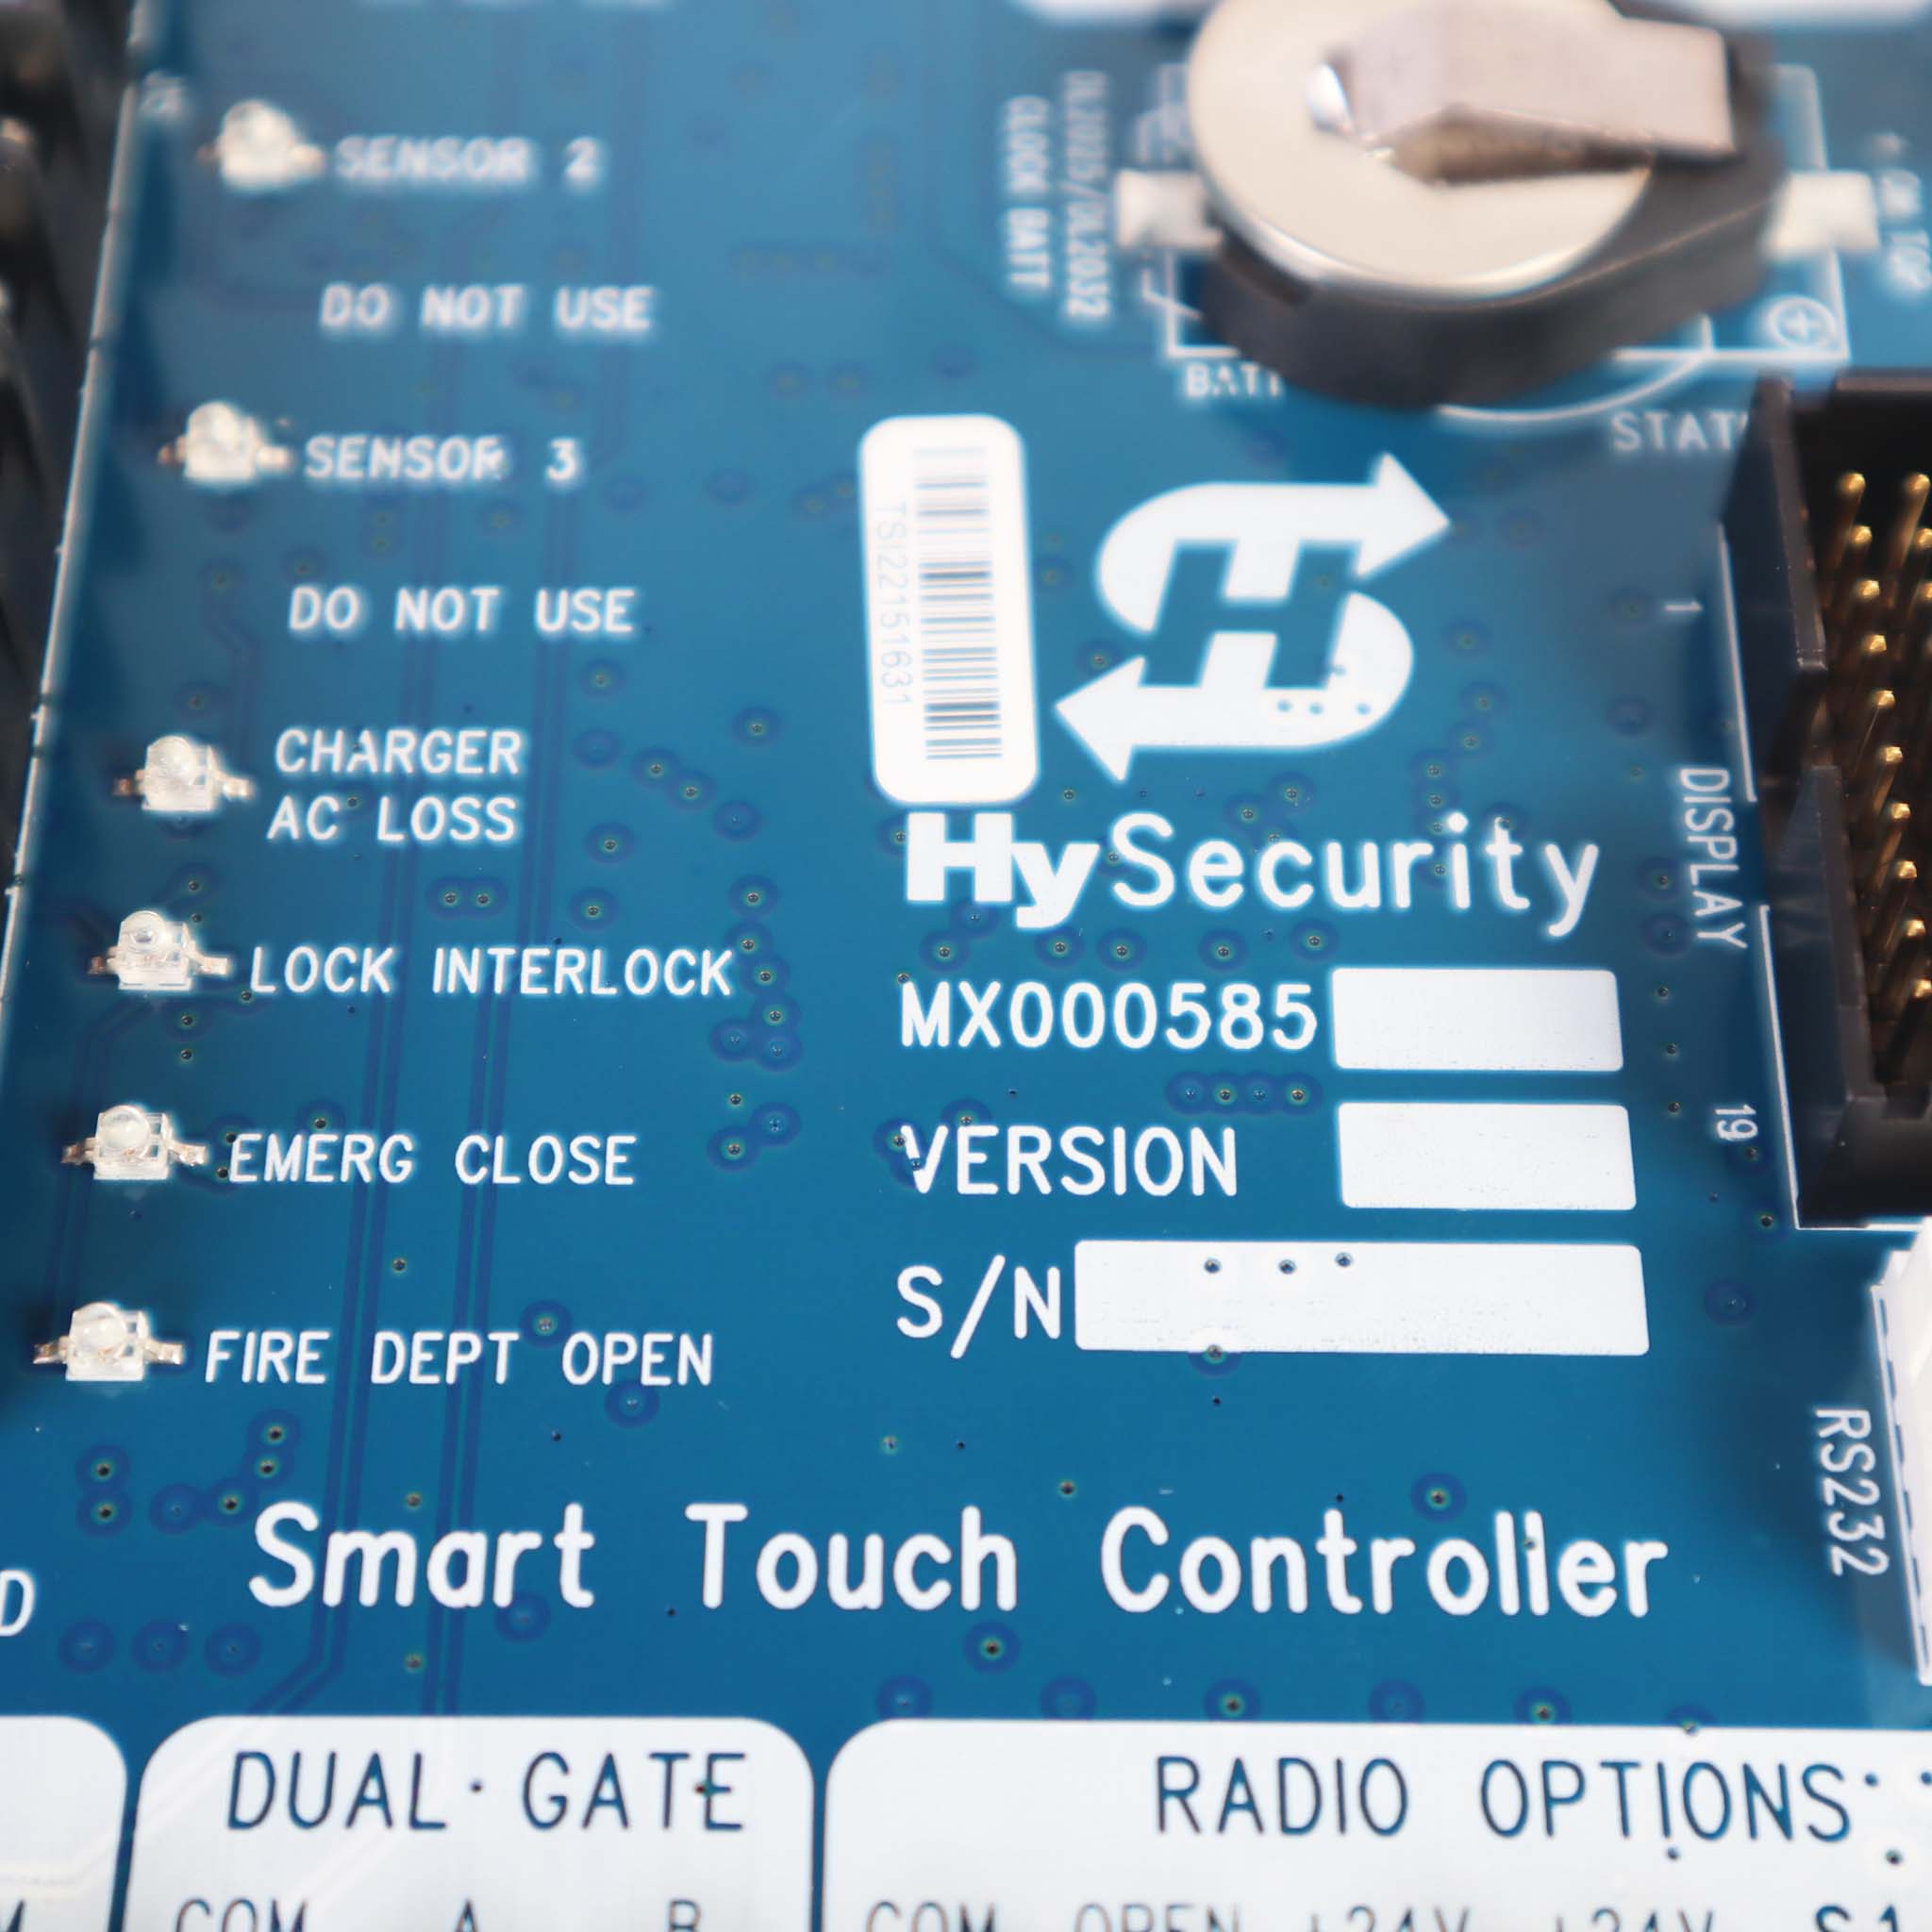 HySecurity MX000585-0 Control Board Smart Touch